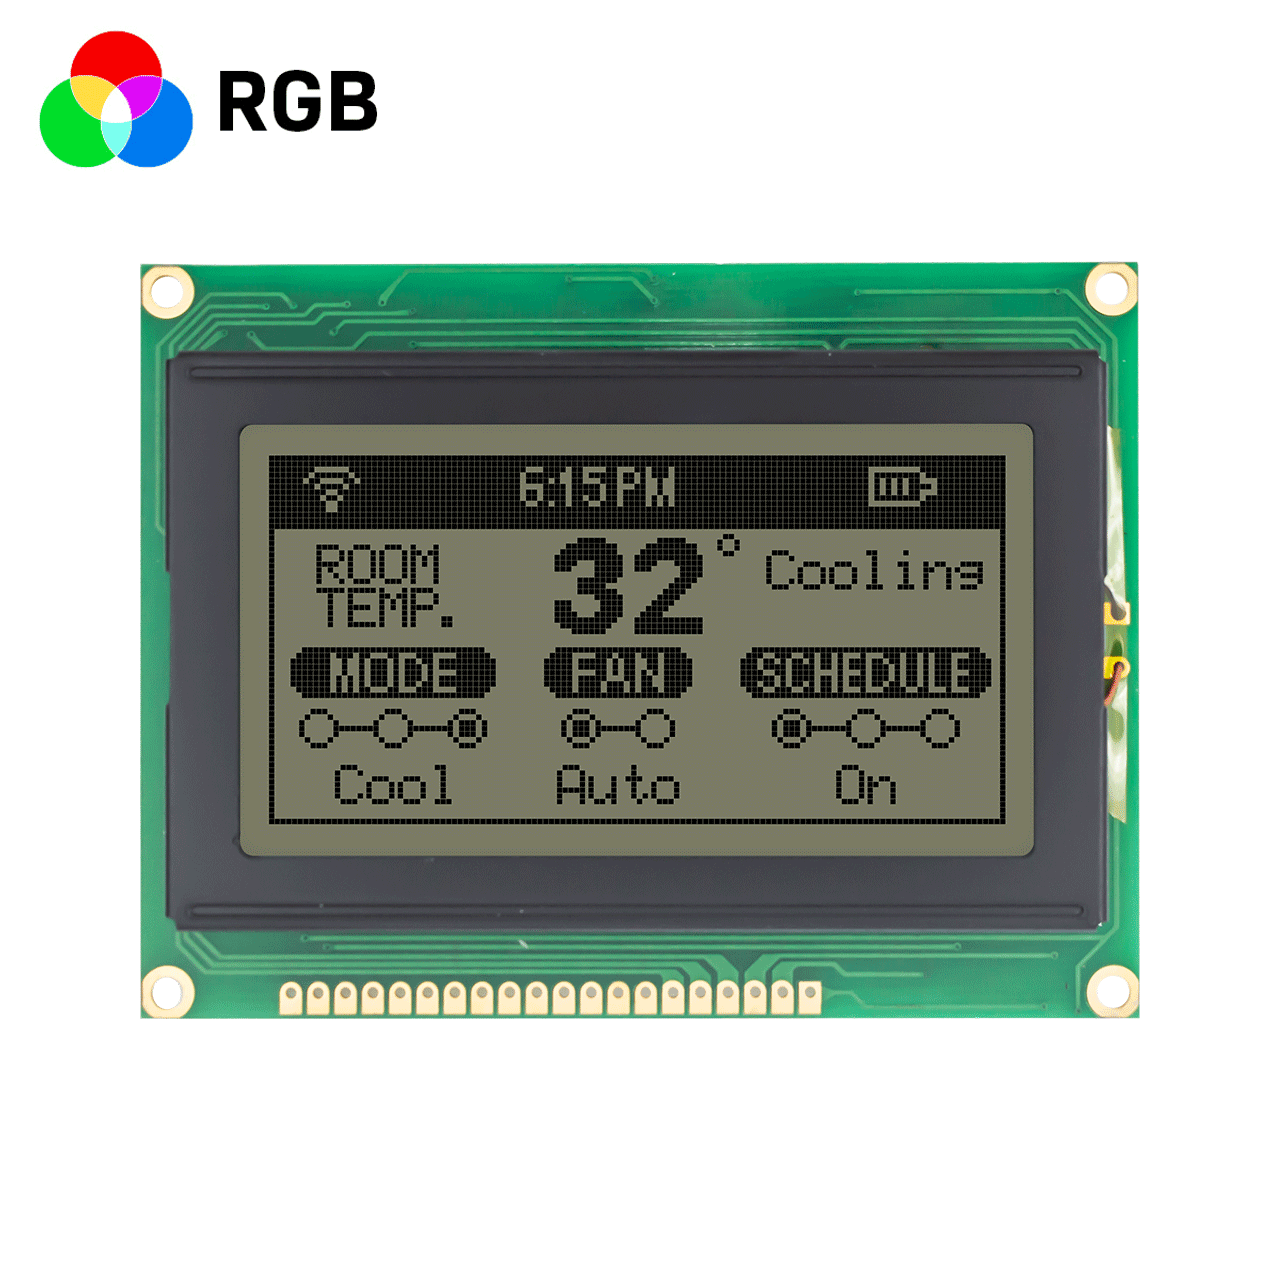 3.2"Low price 128x64 RGB red, green and blue mode/graphic COB LCD module/supports 5V/FSTN positive display at the same time/KS0107+KS0108 or compatible